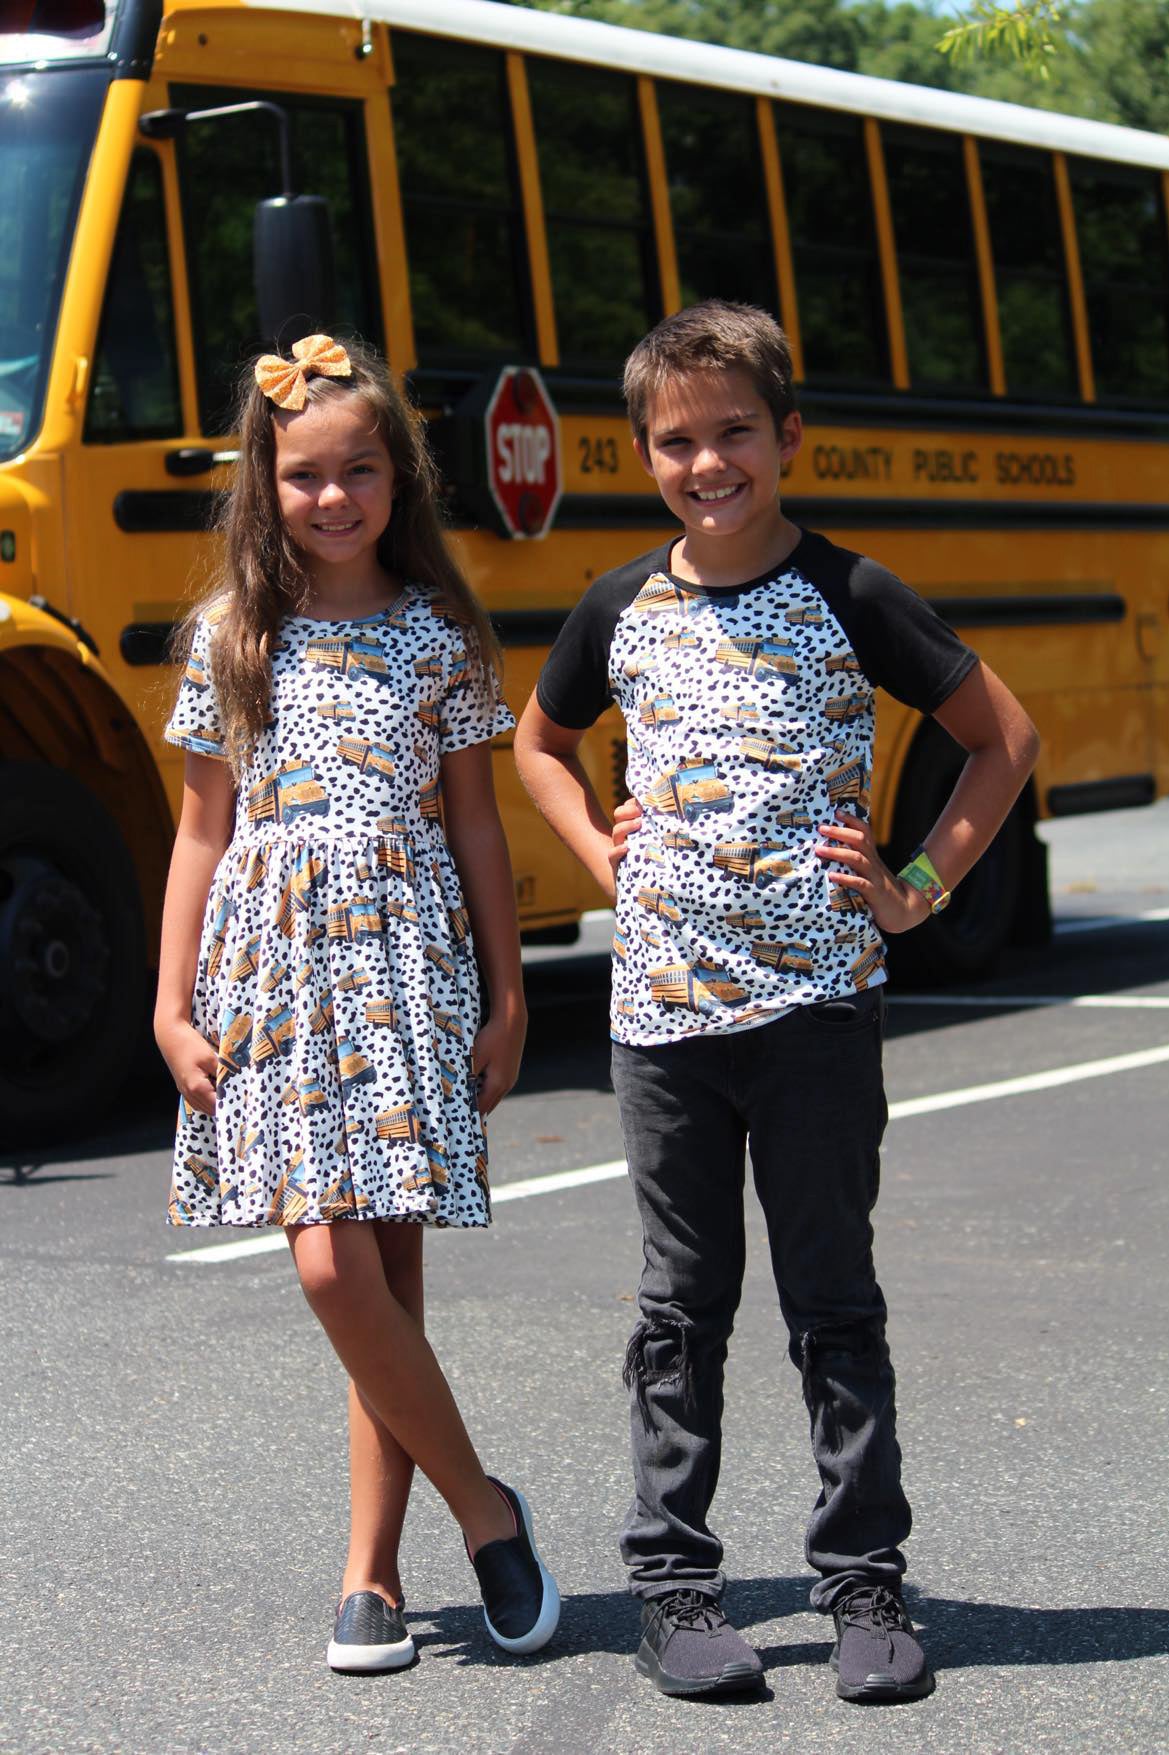 [The Spotted School Bus] Twirl Dress